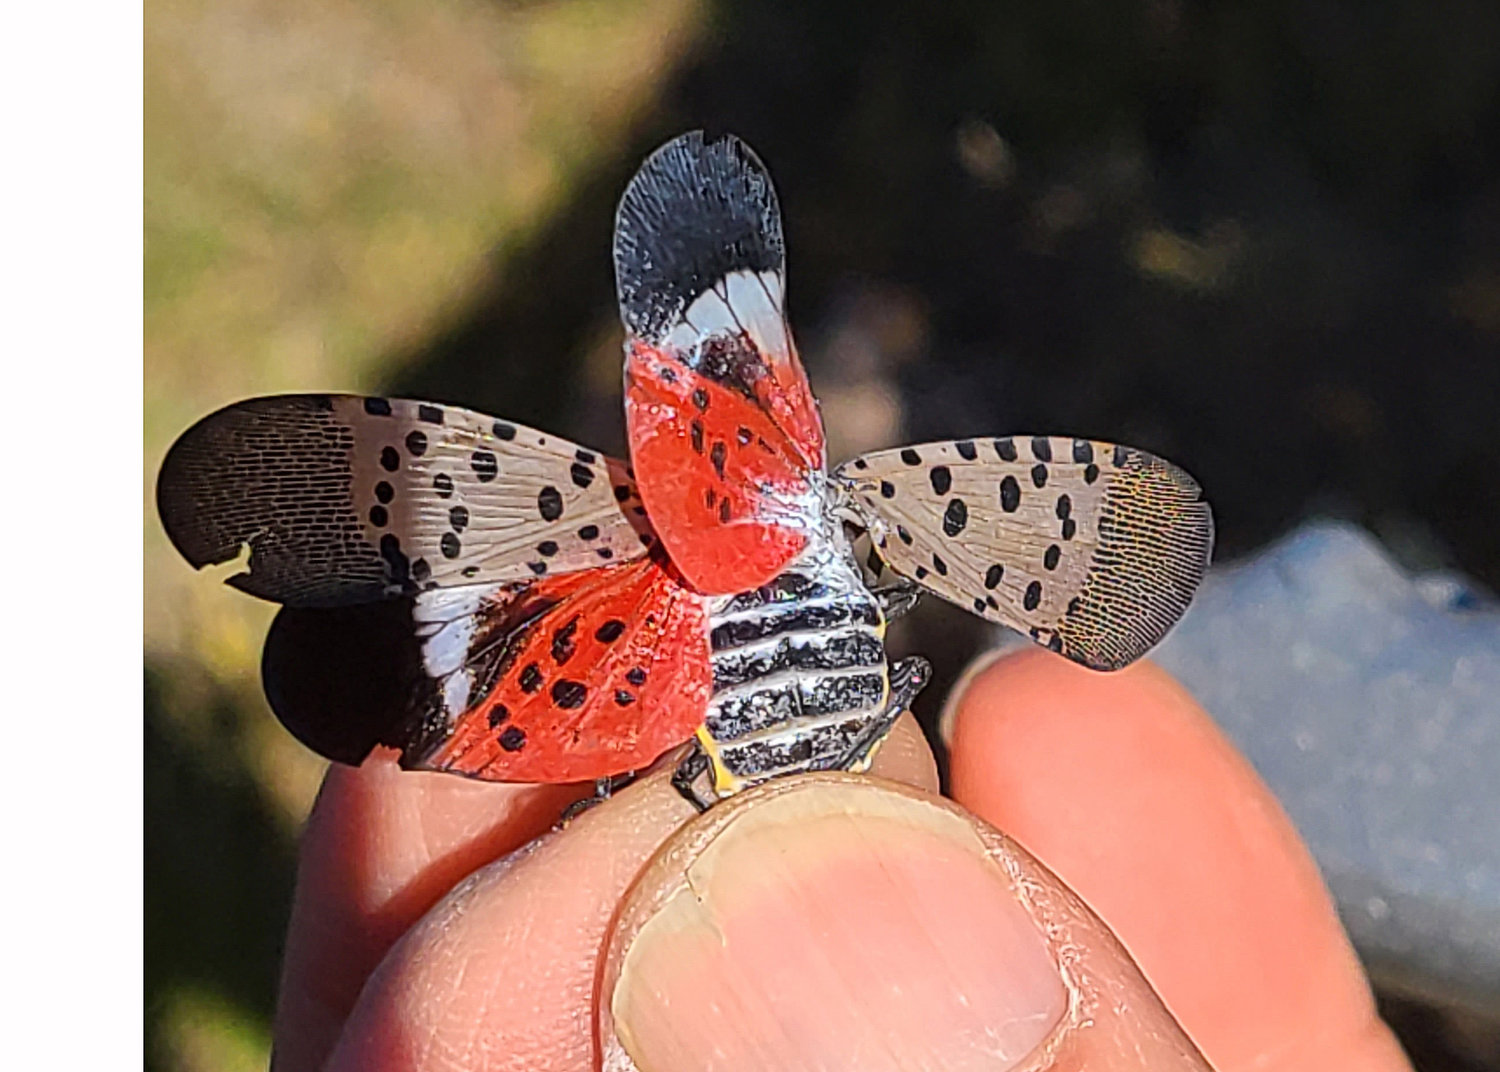 This is the same adult showing the red hindwing, which would be visible during flight. Normally, the brilliant hindwing is hidden by the forewing when the insect is not in flight. Once in flight, they fly short distances and could be mistaken for grasshoppers in flight if not for the color of the wings. They are efficient hitchhikers, hanging on to surfaces or hiding in the wheel wells of vehicles; this facilitates their spread to new areas...